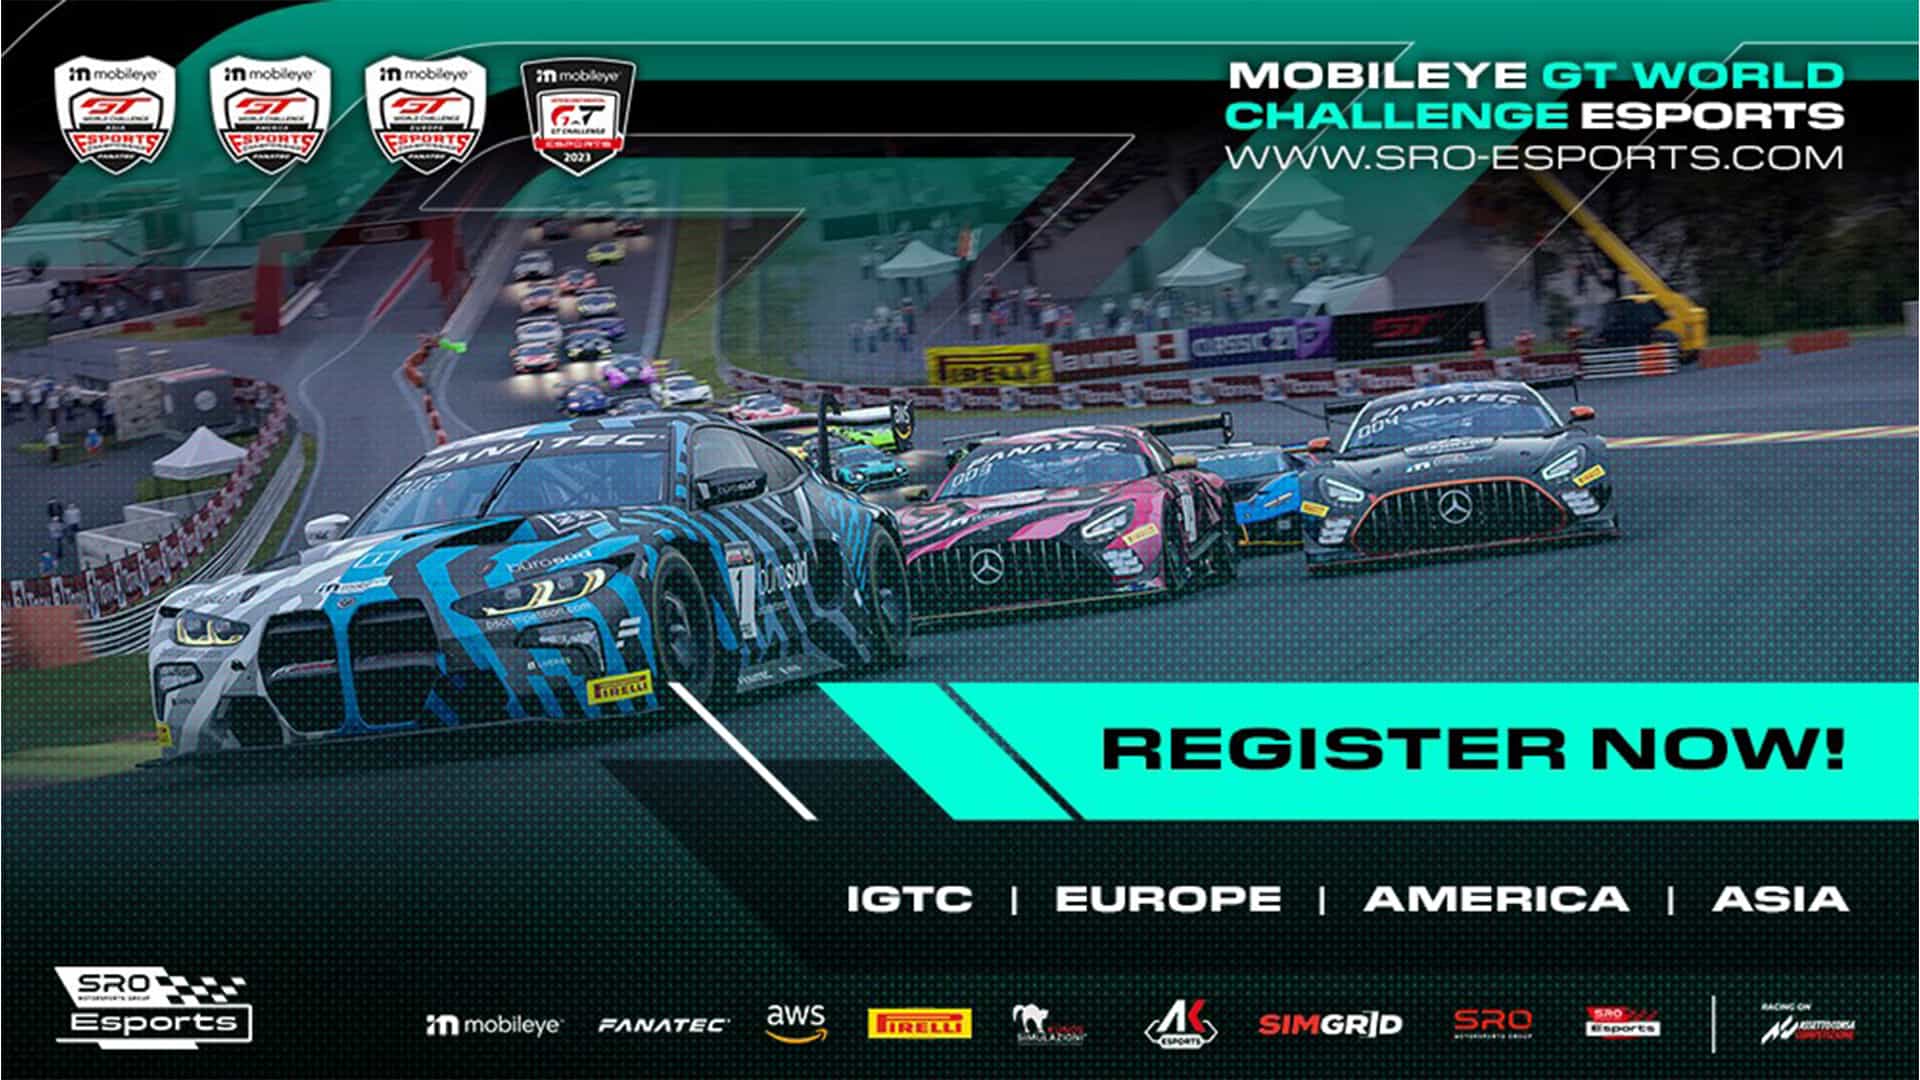 SRO Esports Racing Night will take place in-person during Spa 24